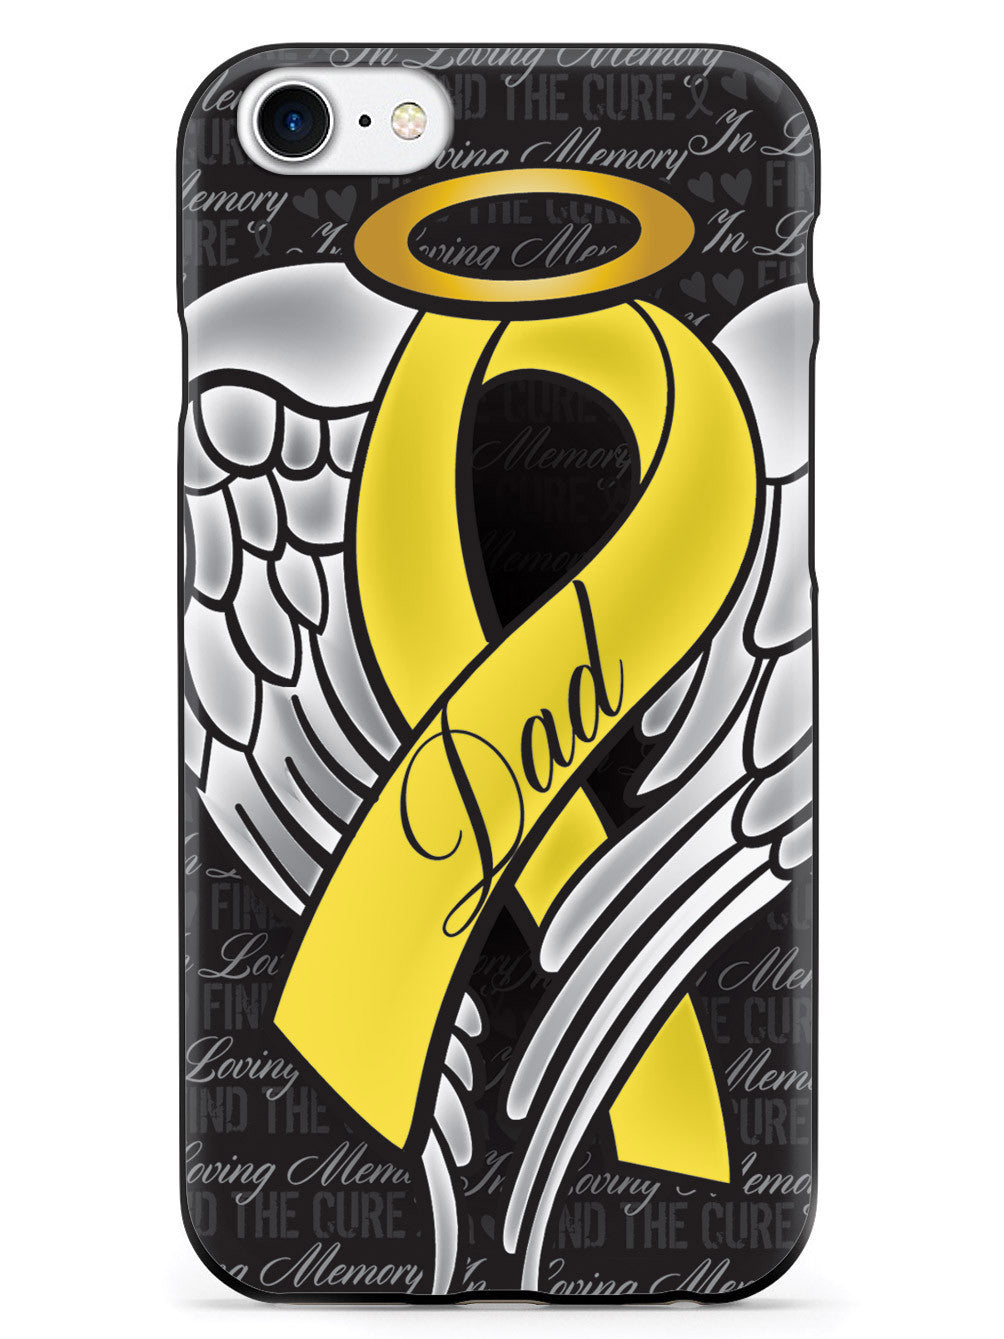 In Loving Memory of My Dad - Yellow Ribbon Case